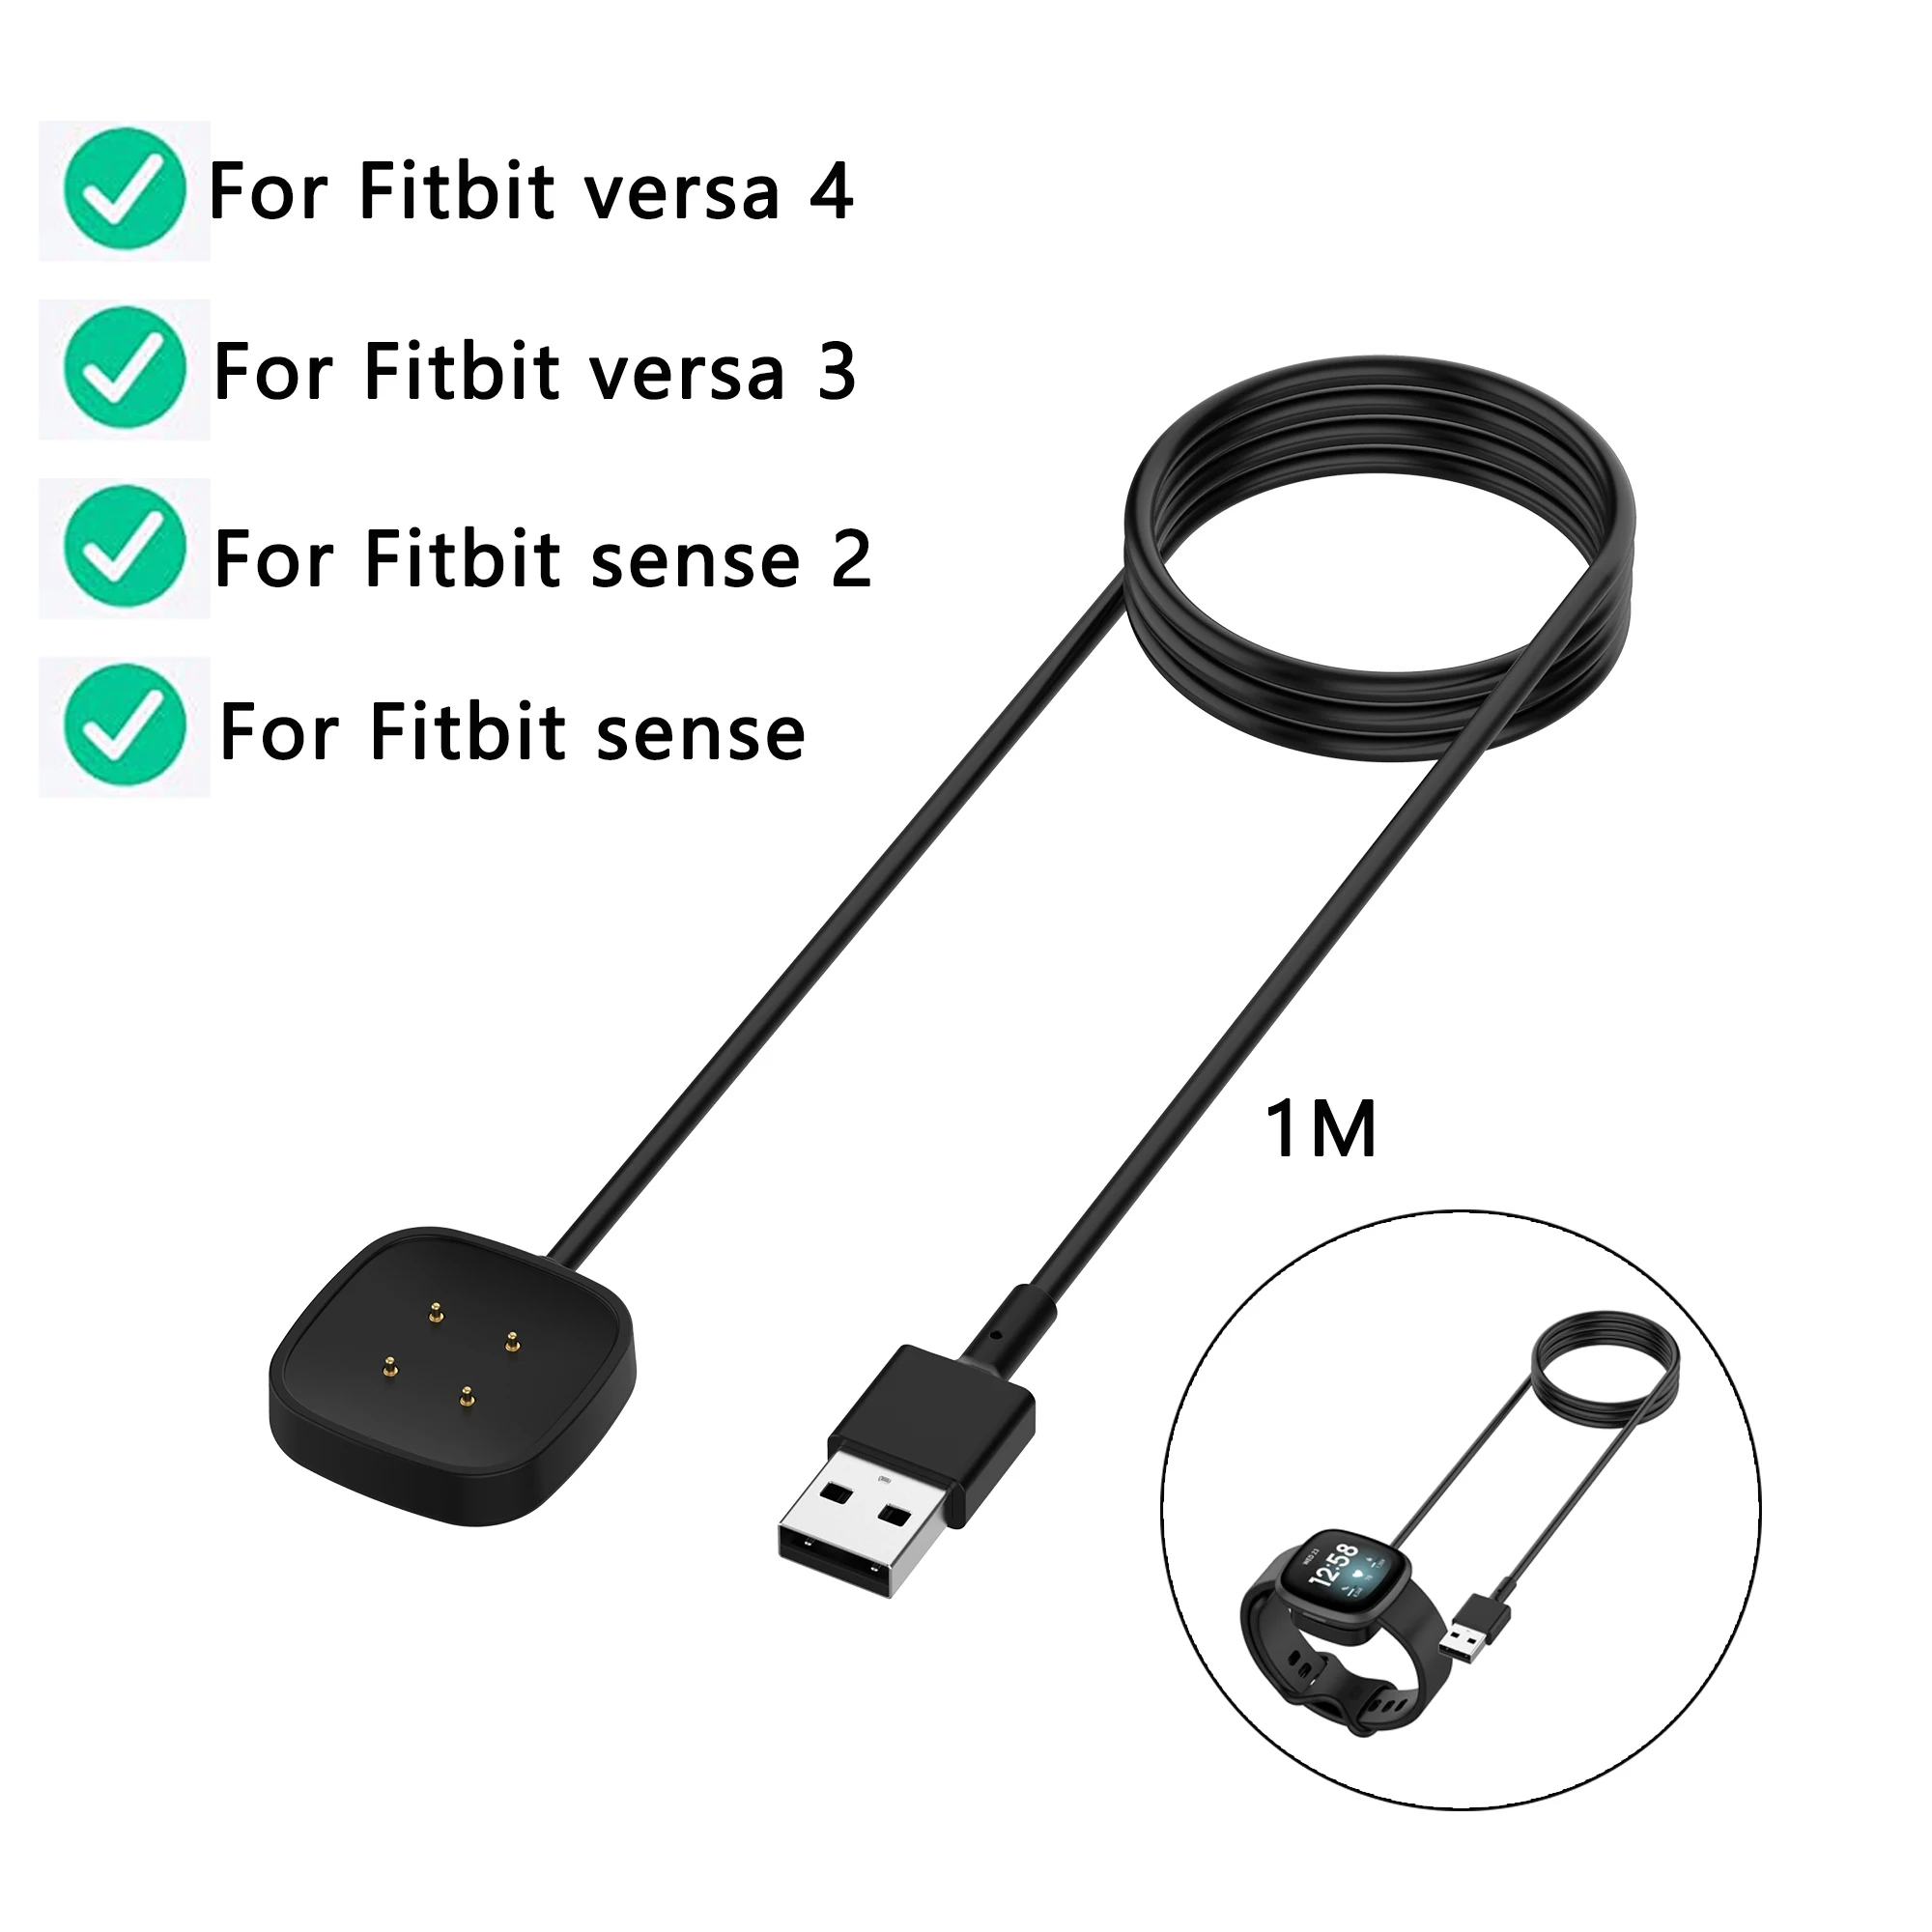 1m Charger Cable For Fitbit Sense Sense 2 USB Charging Cable Cord Clip Dock Accessories For Fitbit Versa 3 Versa 4 Smartwatch